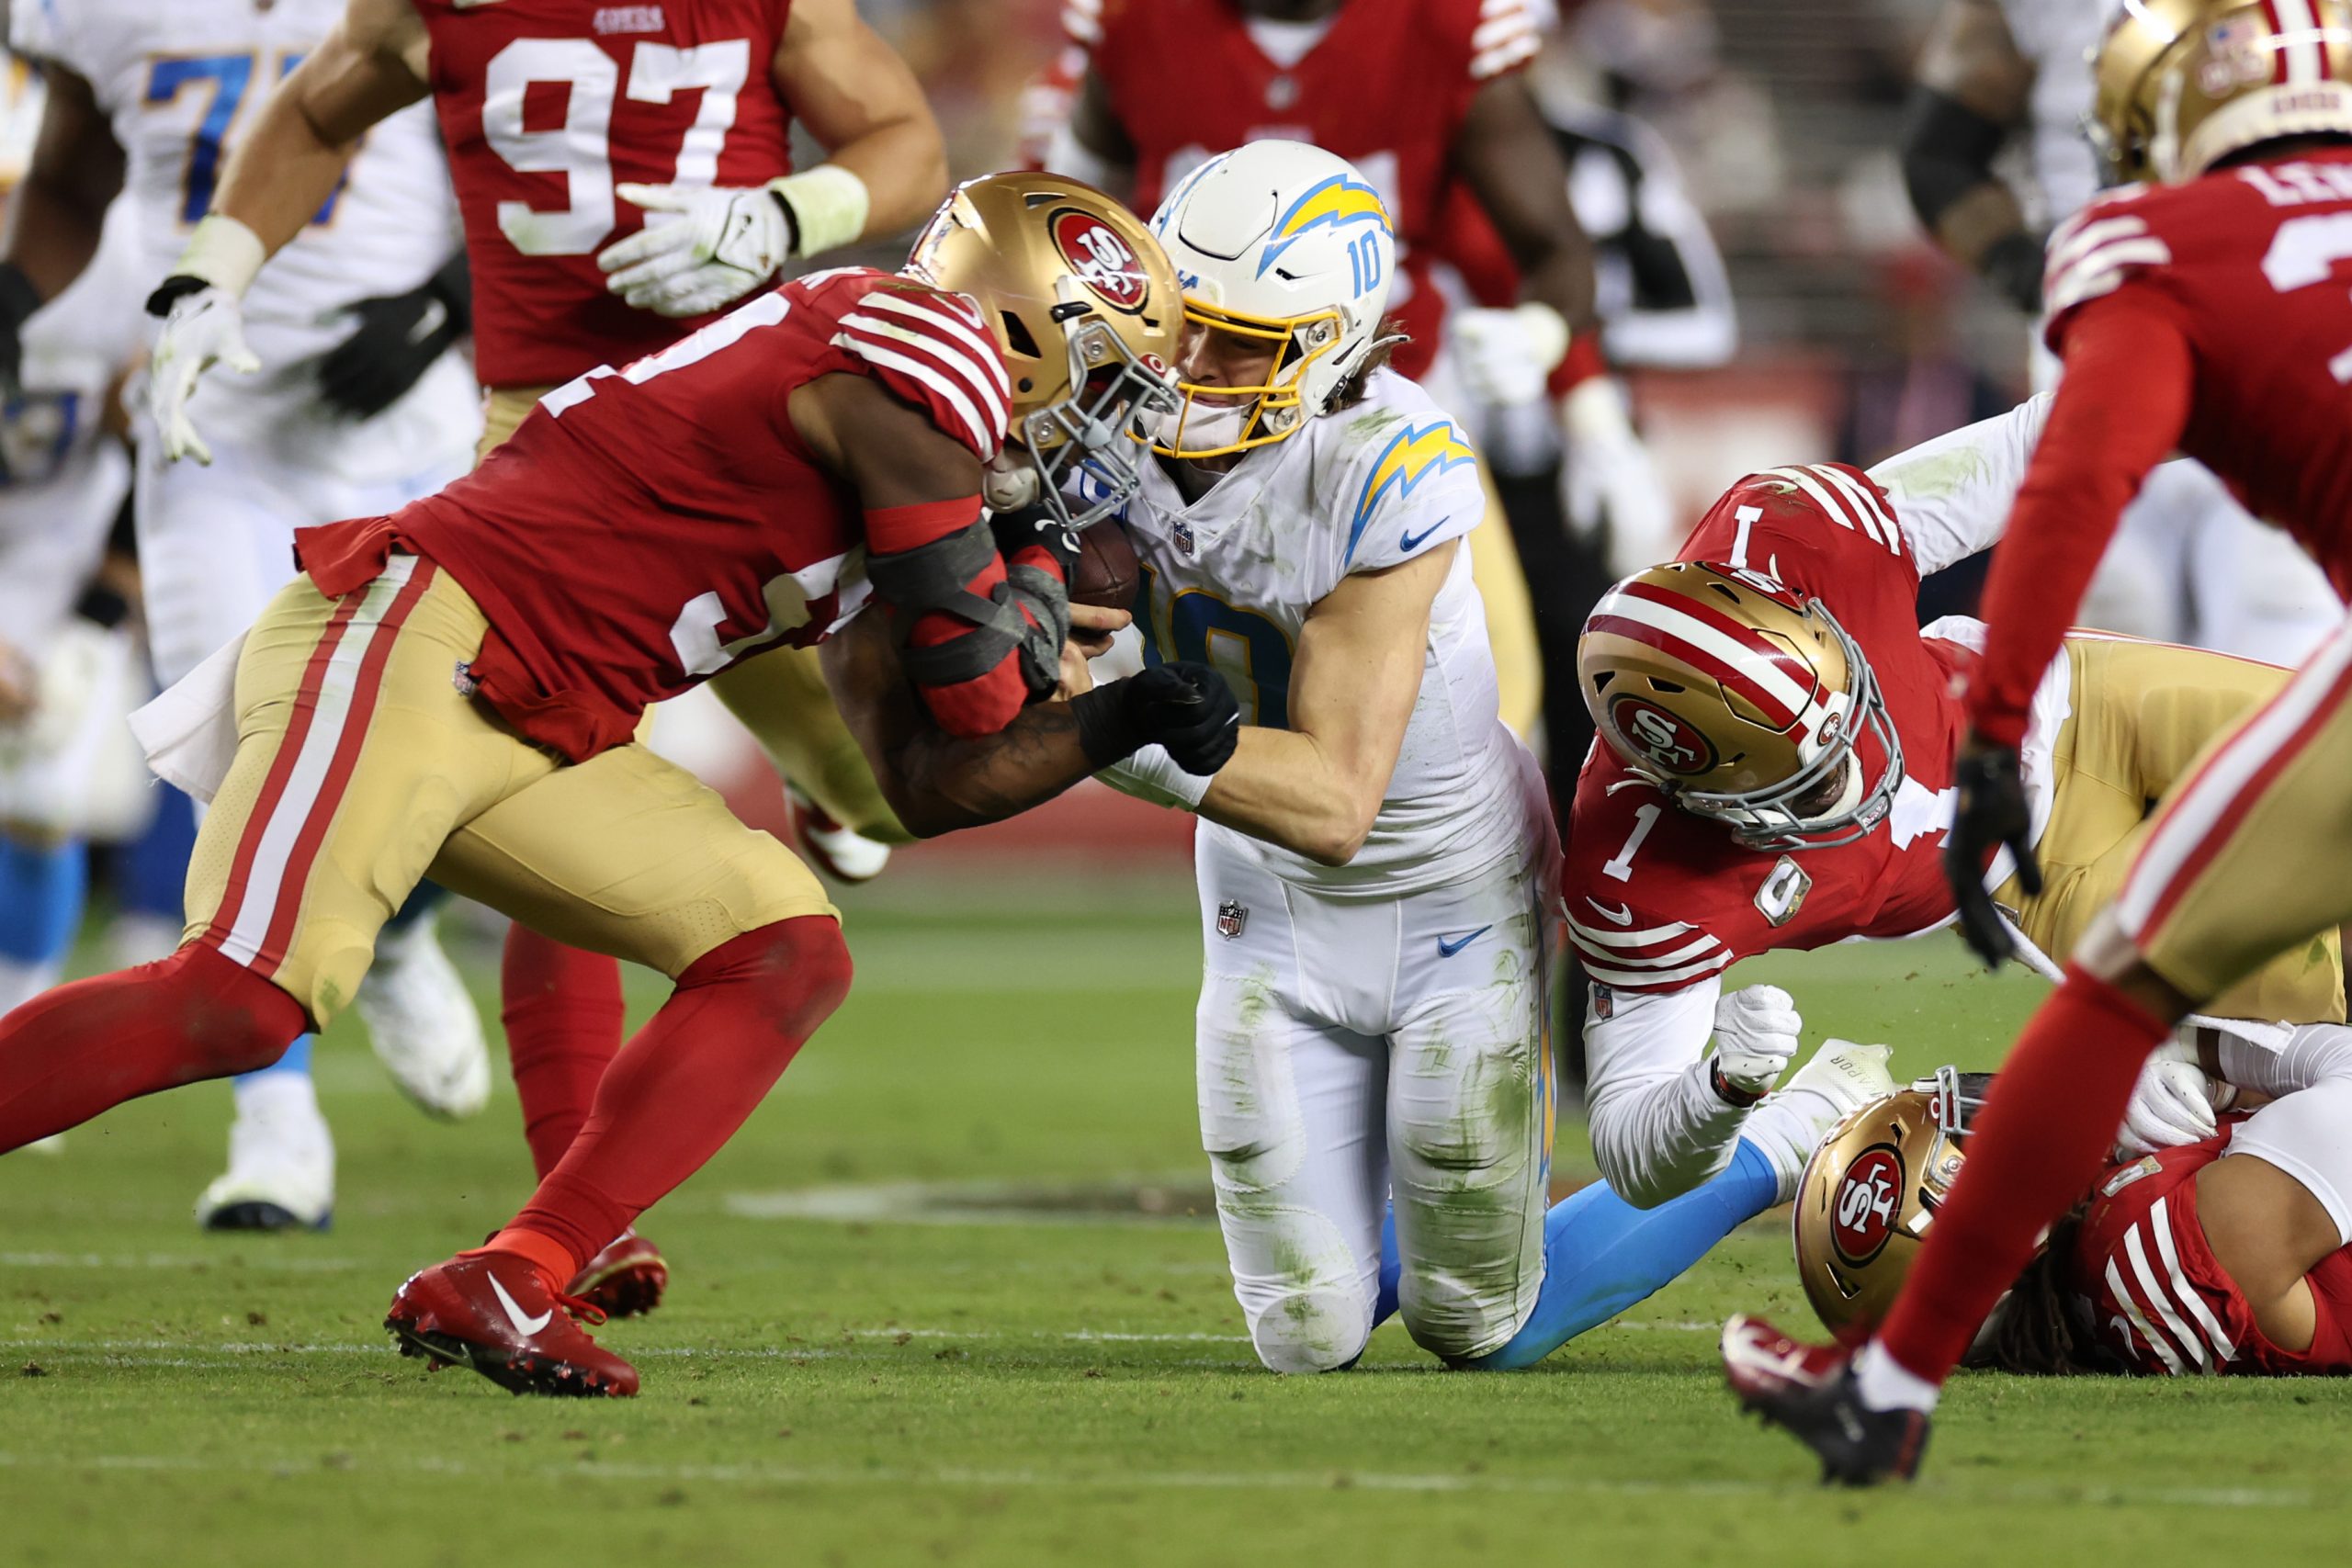 How to watch 49ers v. Chargers Preseason game: TV channel, start